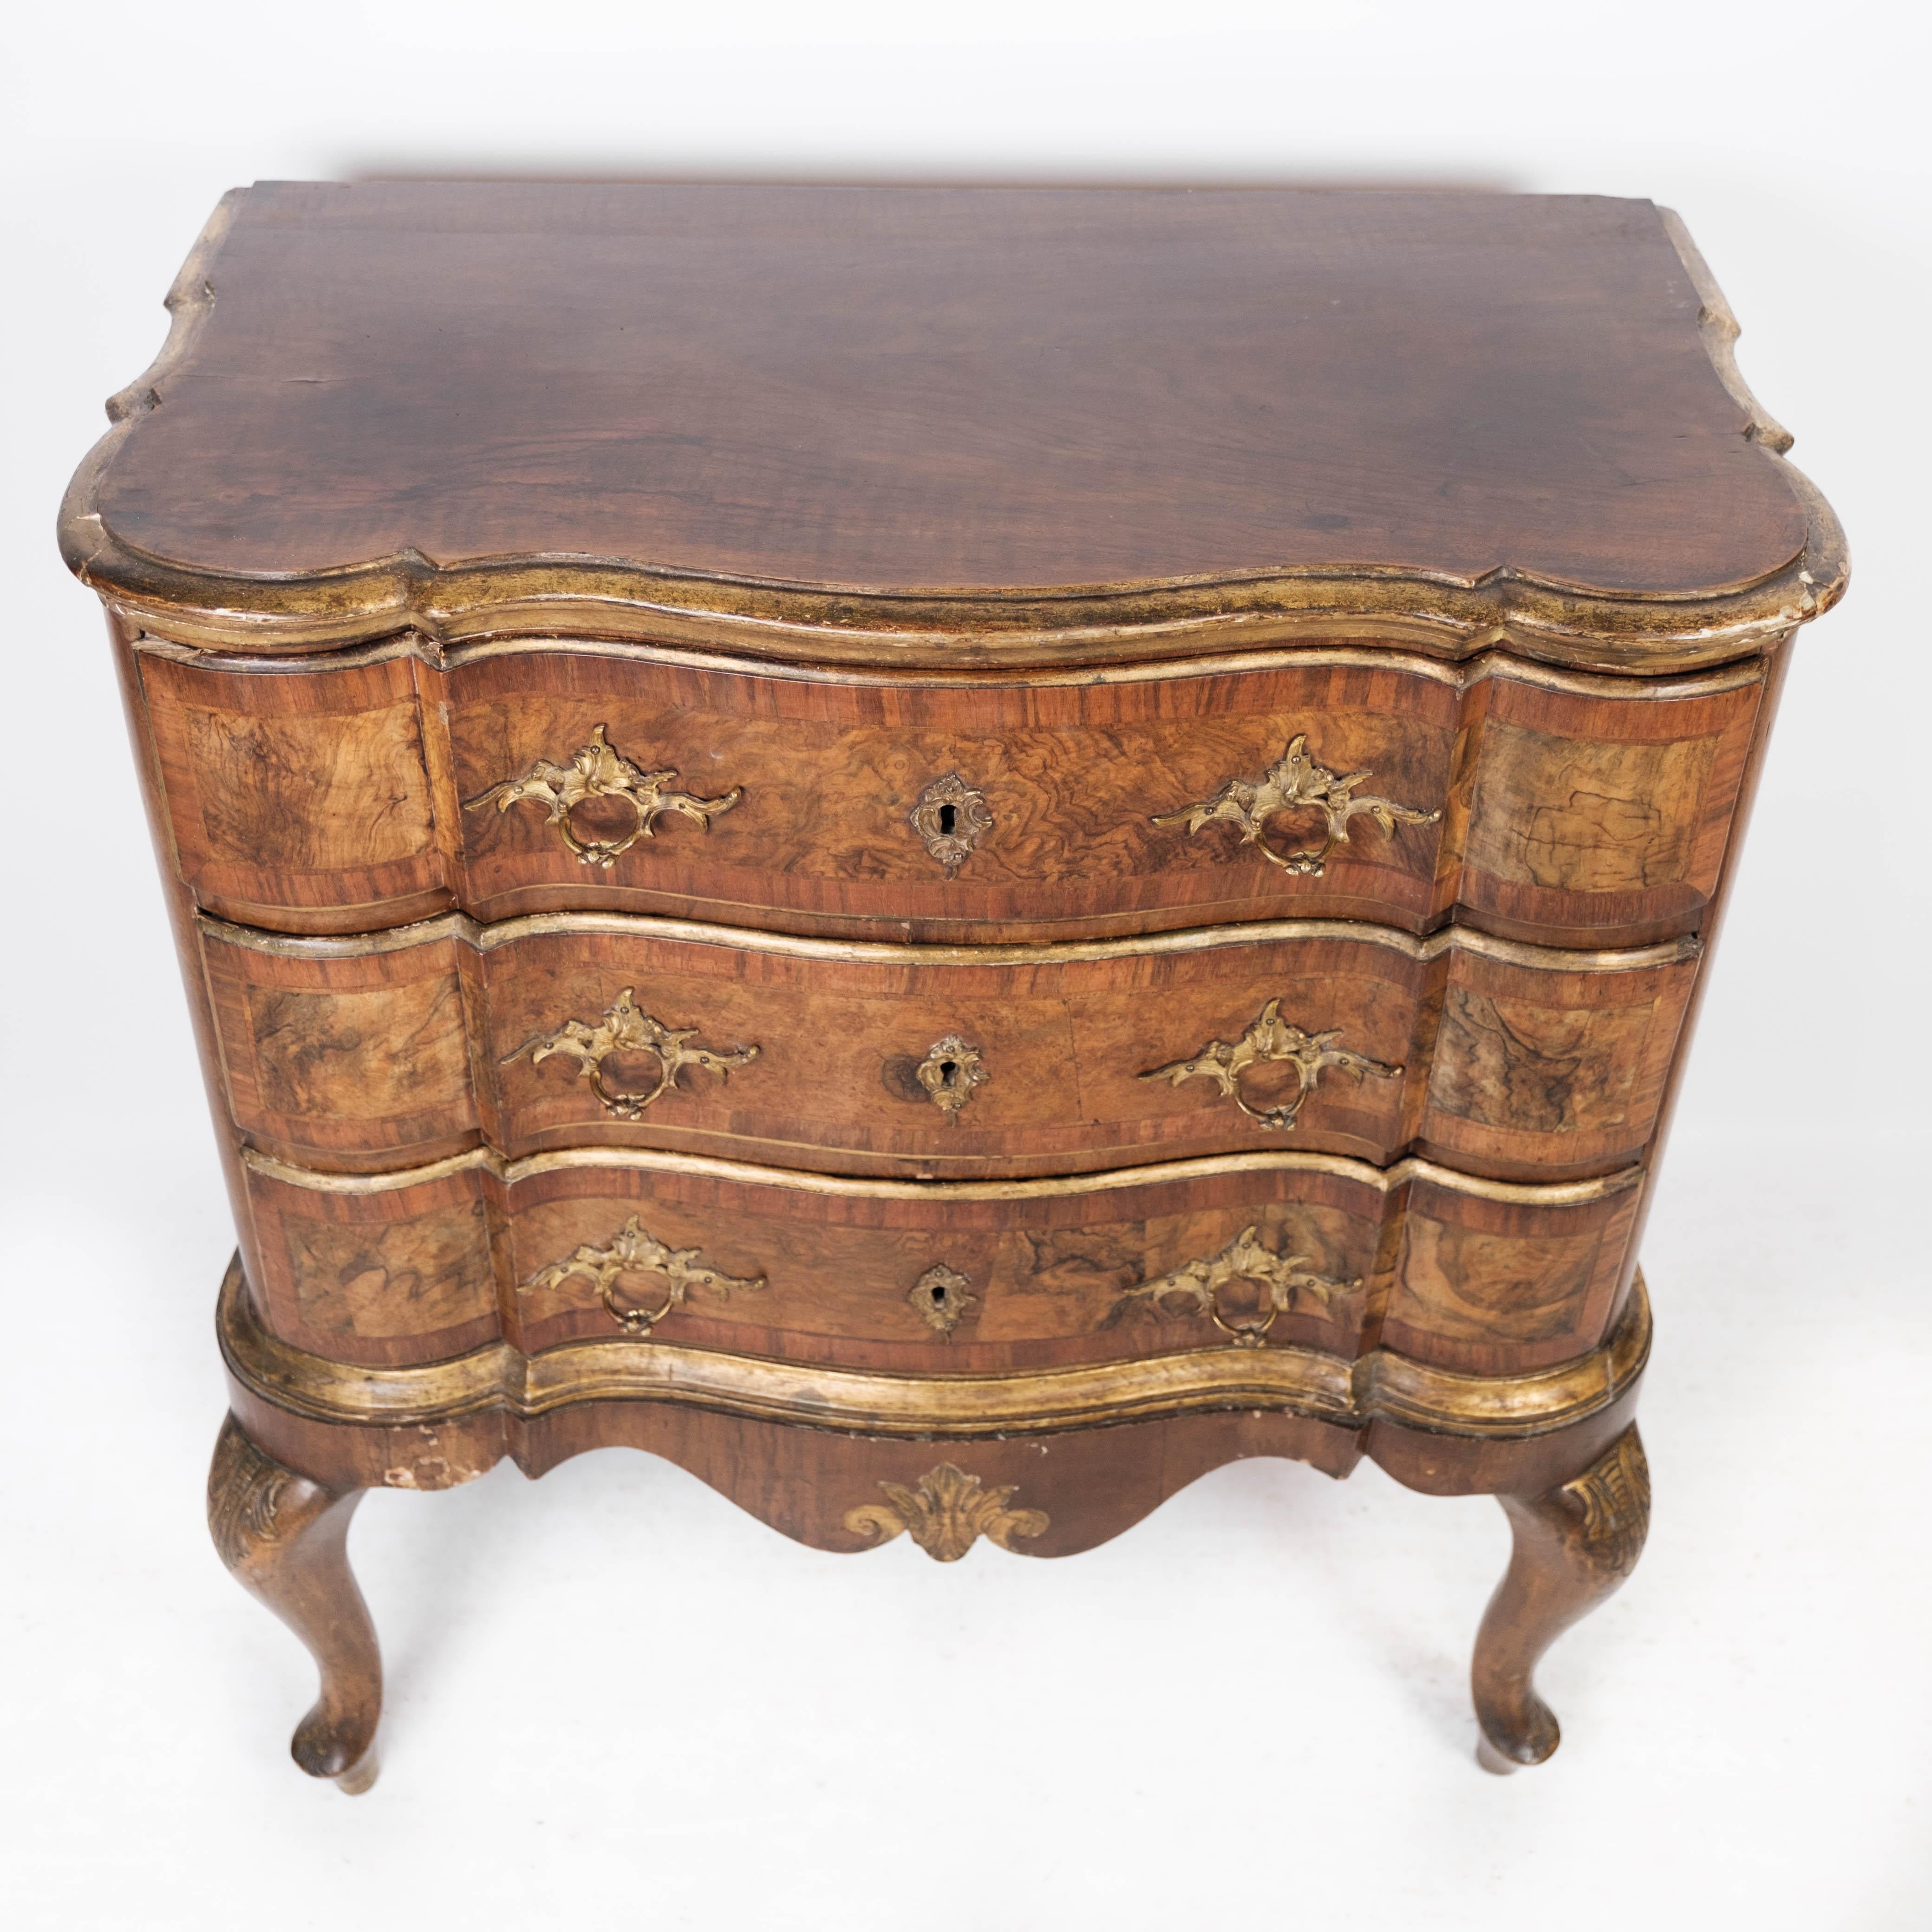 Rococo chest of drawers in walnut from Southern Germany around the 1780s. The chest is in great antique condition.